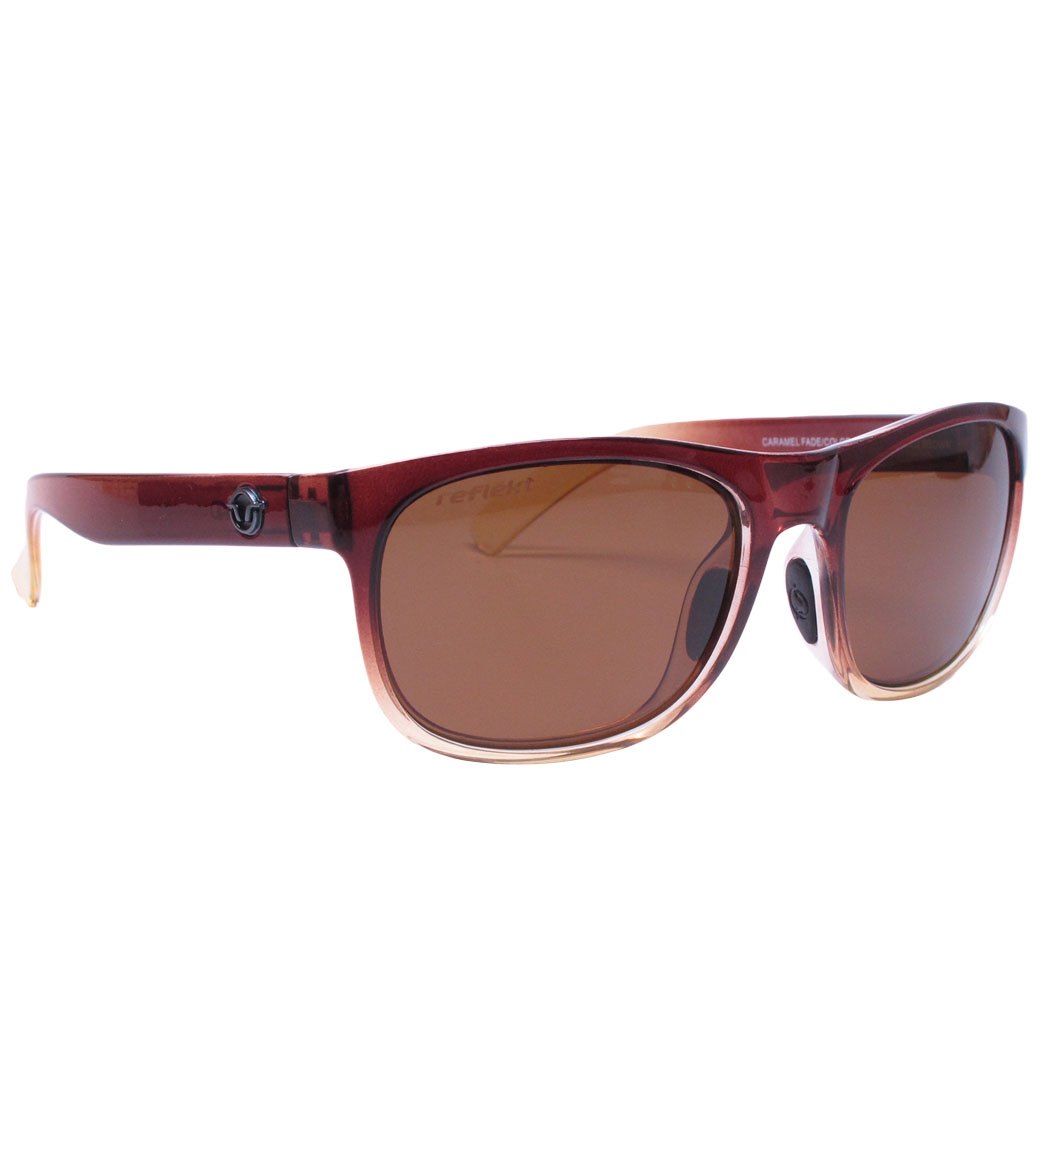 Unsinkable Polarized Nomad Floating Sunglasses - Caramel Fade/Brown - Swimoutlet.com